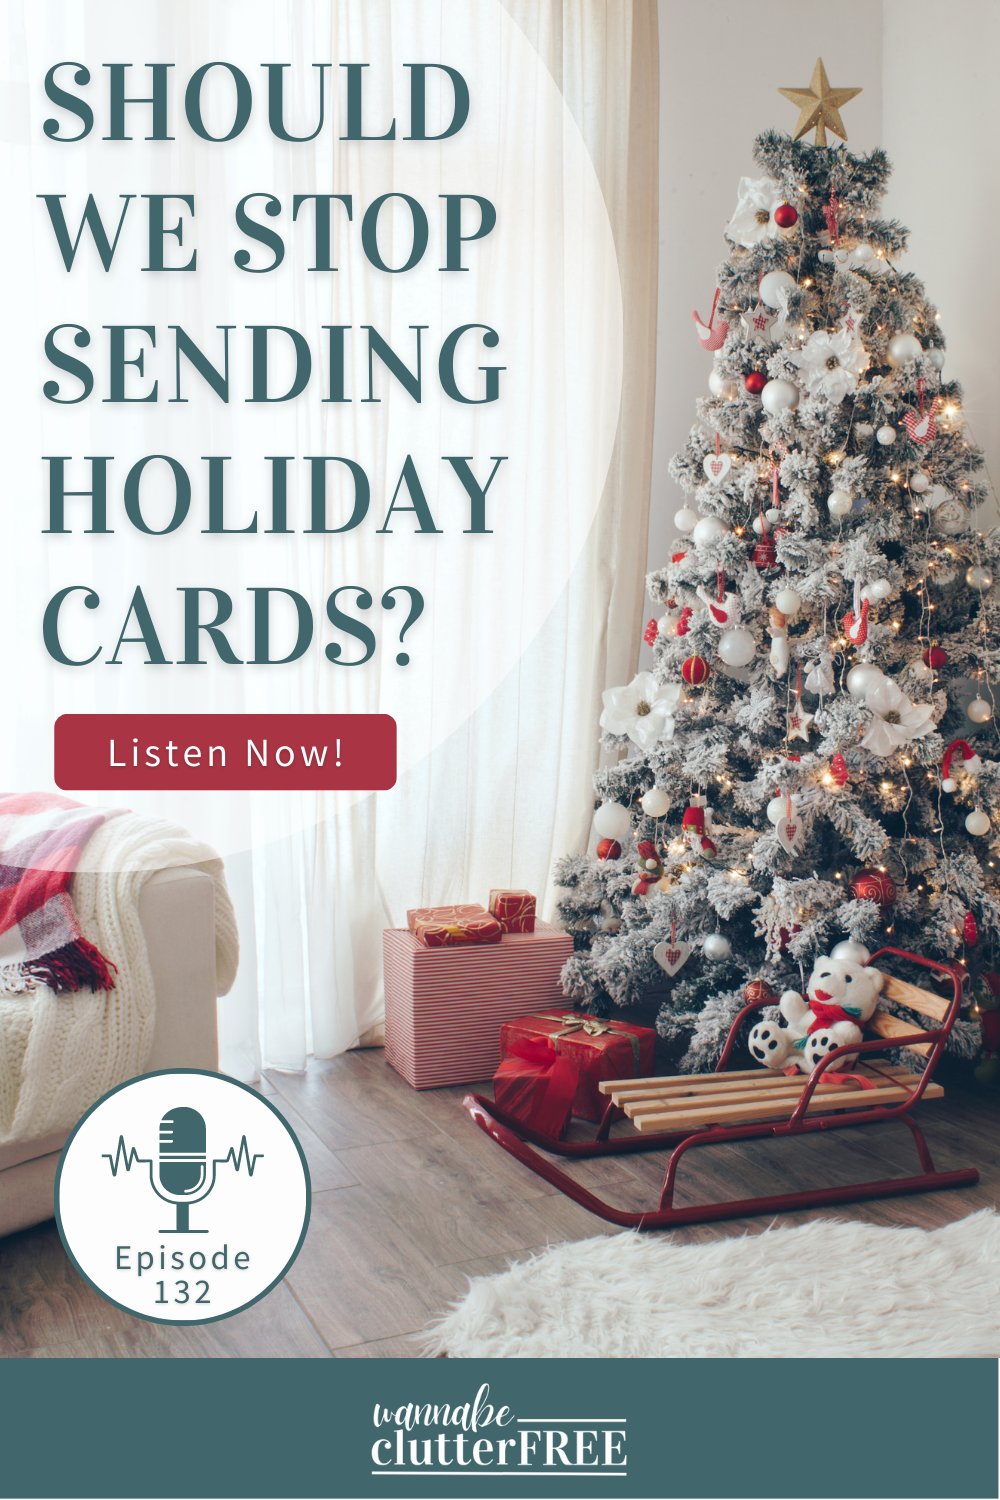 Should We Stop Sending Holiday Cards?